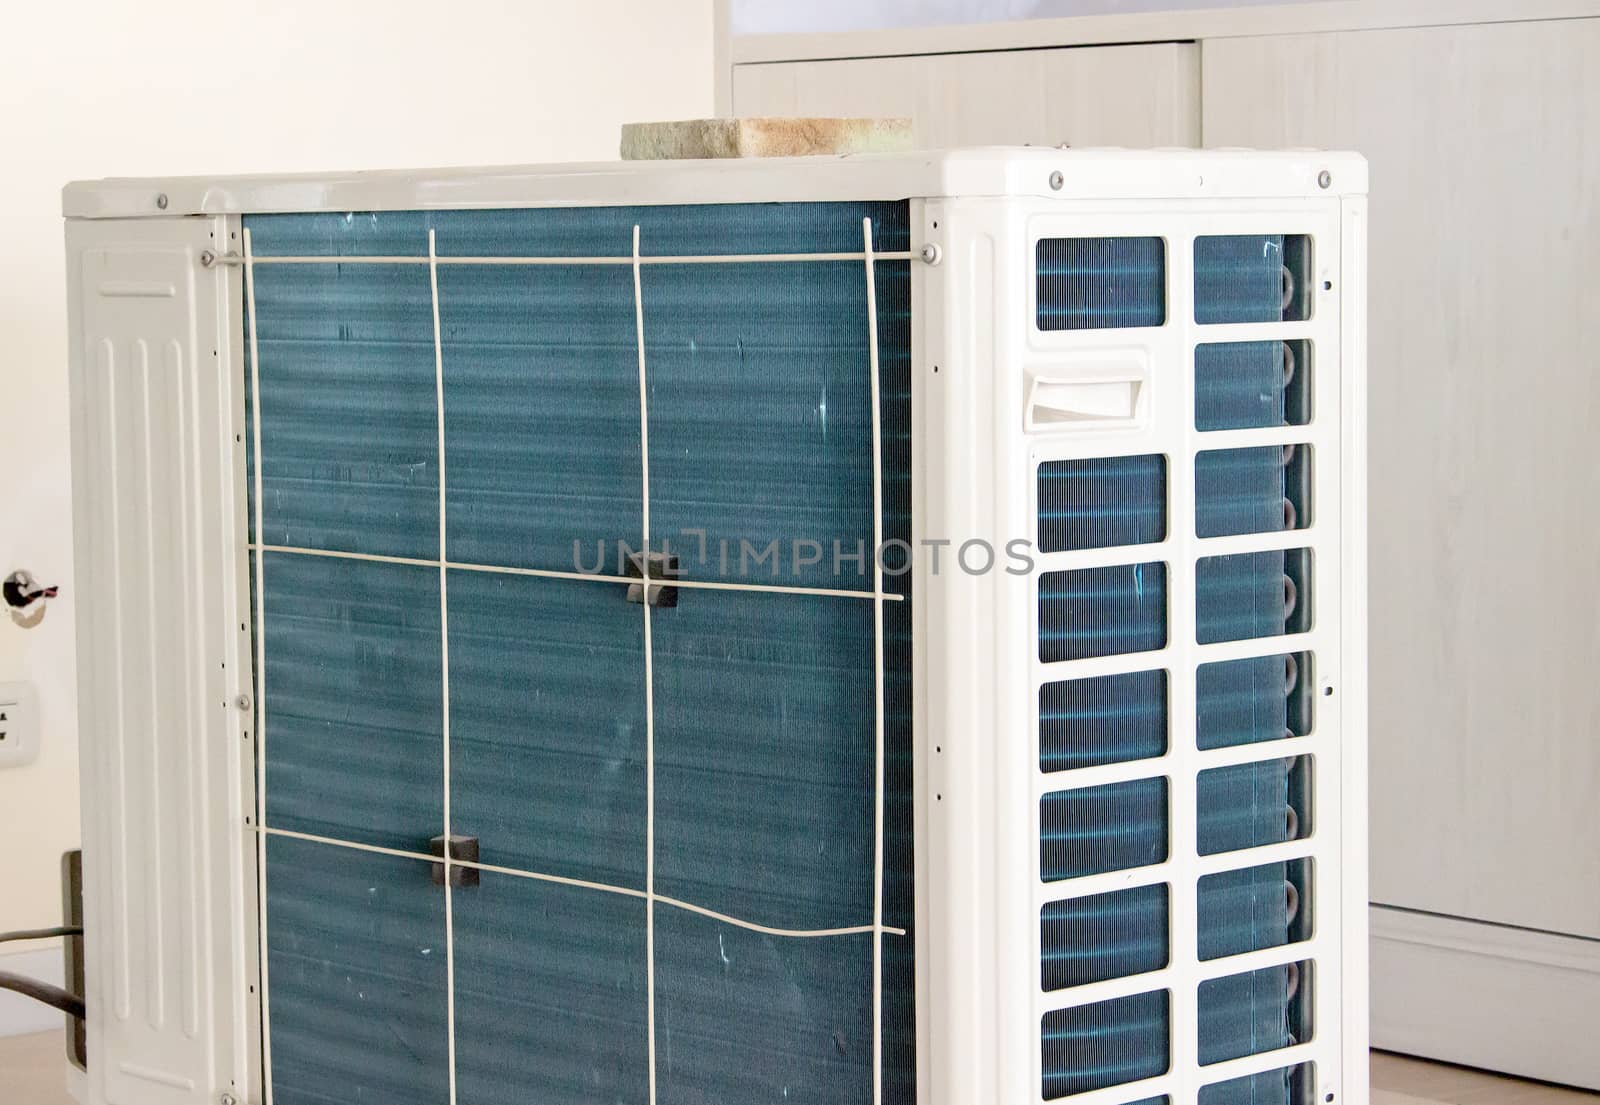 Residential air conditioner condenser unit inside a house